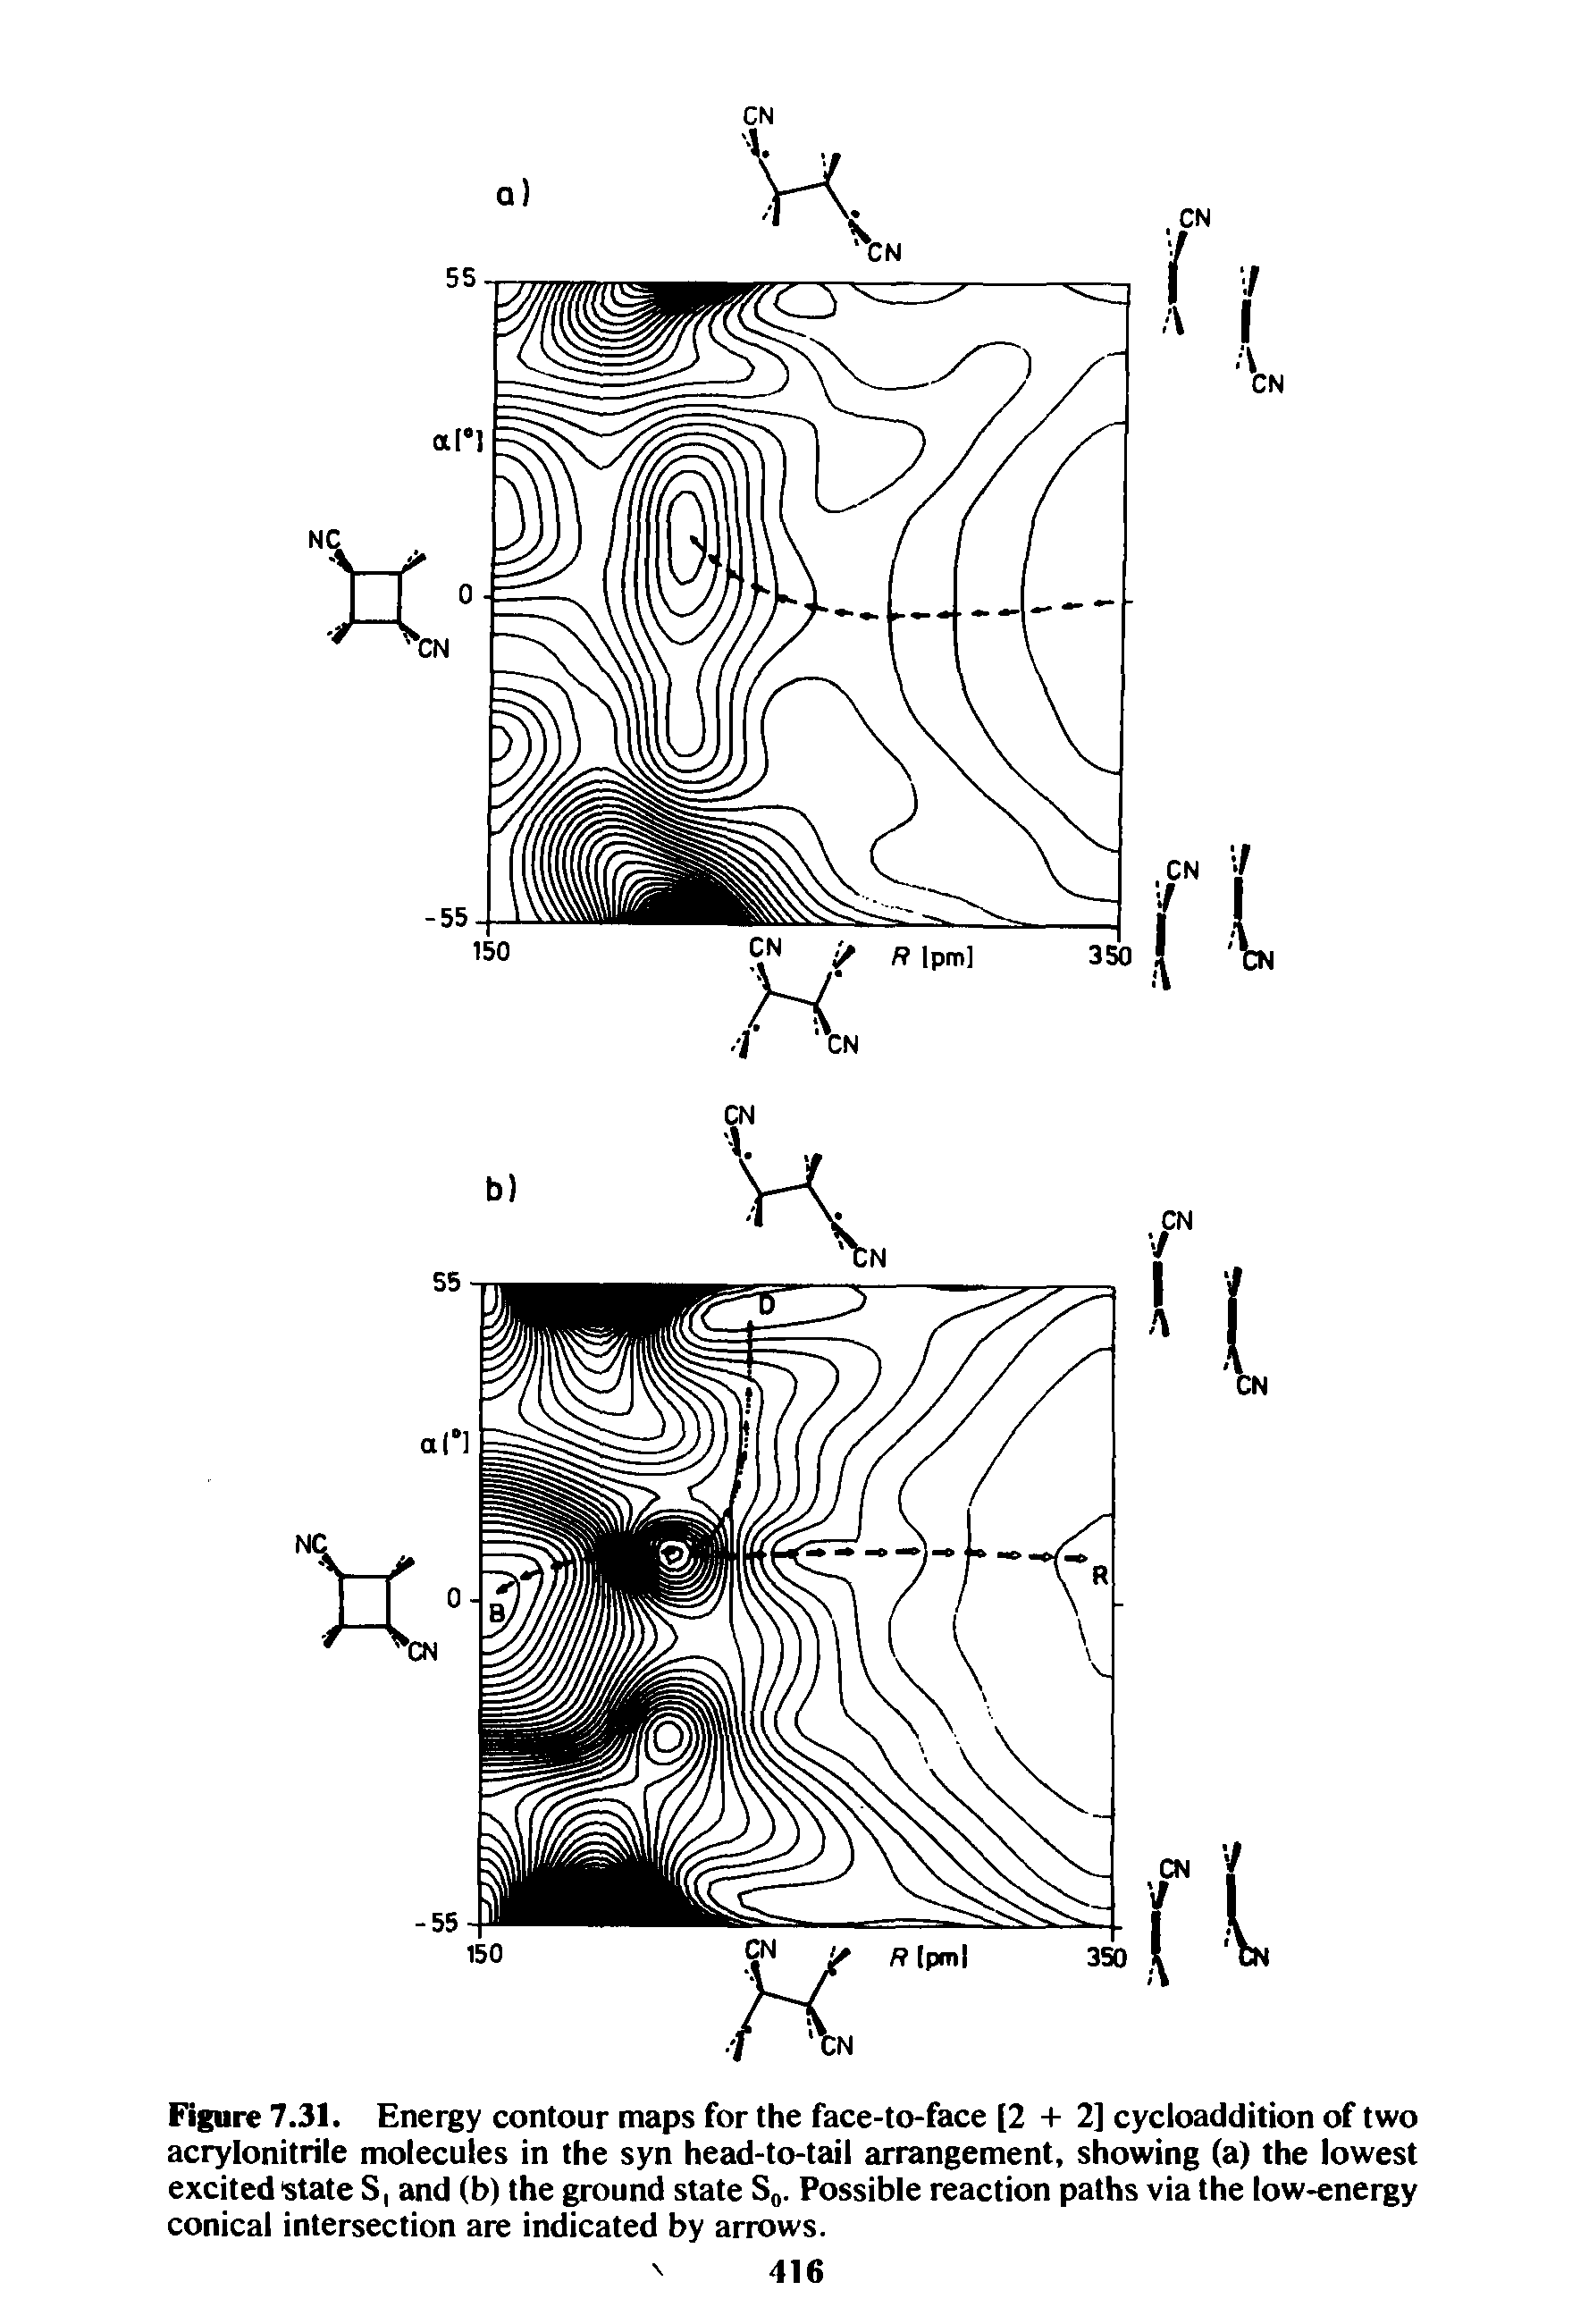 Figure 7.31. Energy contour maps for the face-to-face [2 -I- 2] cycloaddition of two acrylonitrile molecules in the syn head-to-tail arrangement, showing (a) the lowest excited state S, and (b) the ground state S . Possible reaction paths via the low-energy conical intersection are indicated by arrows.